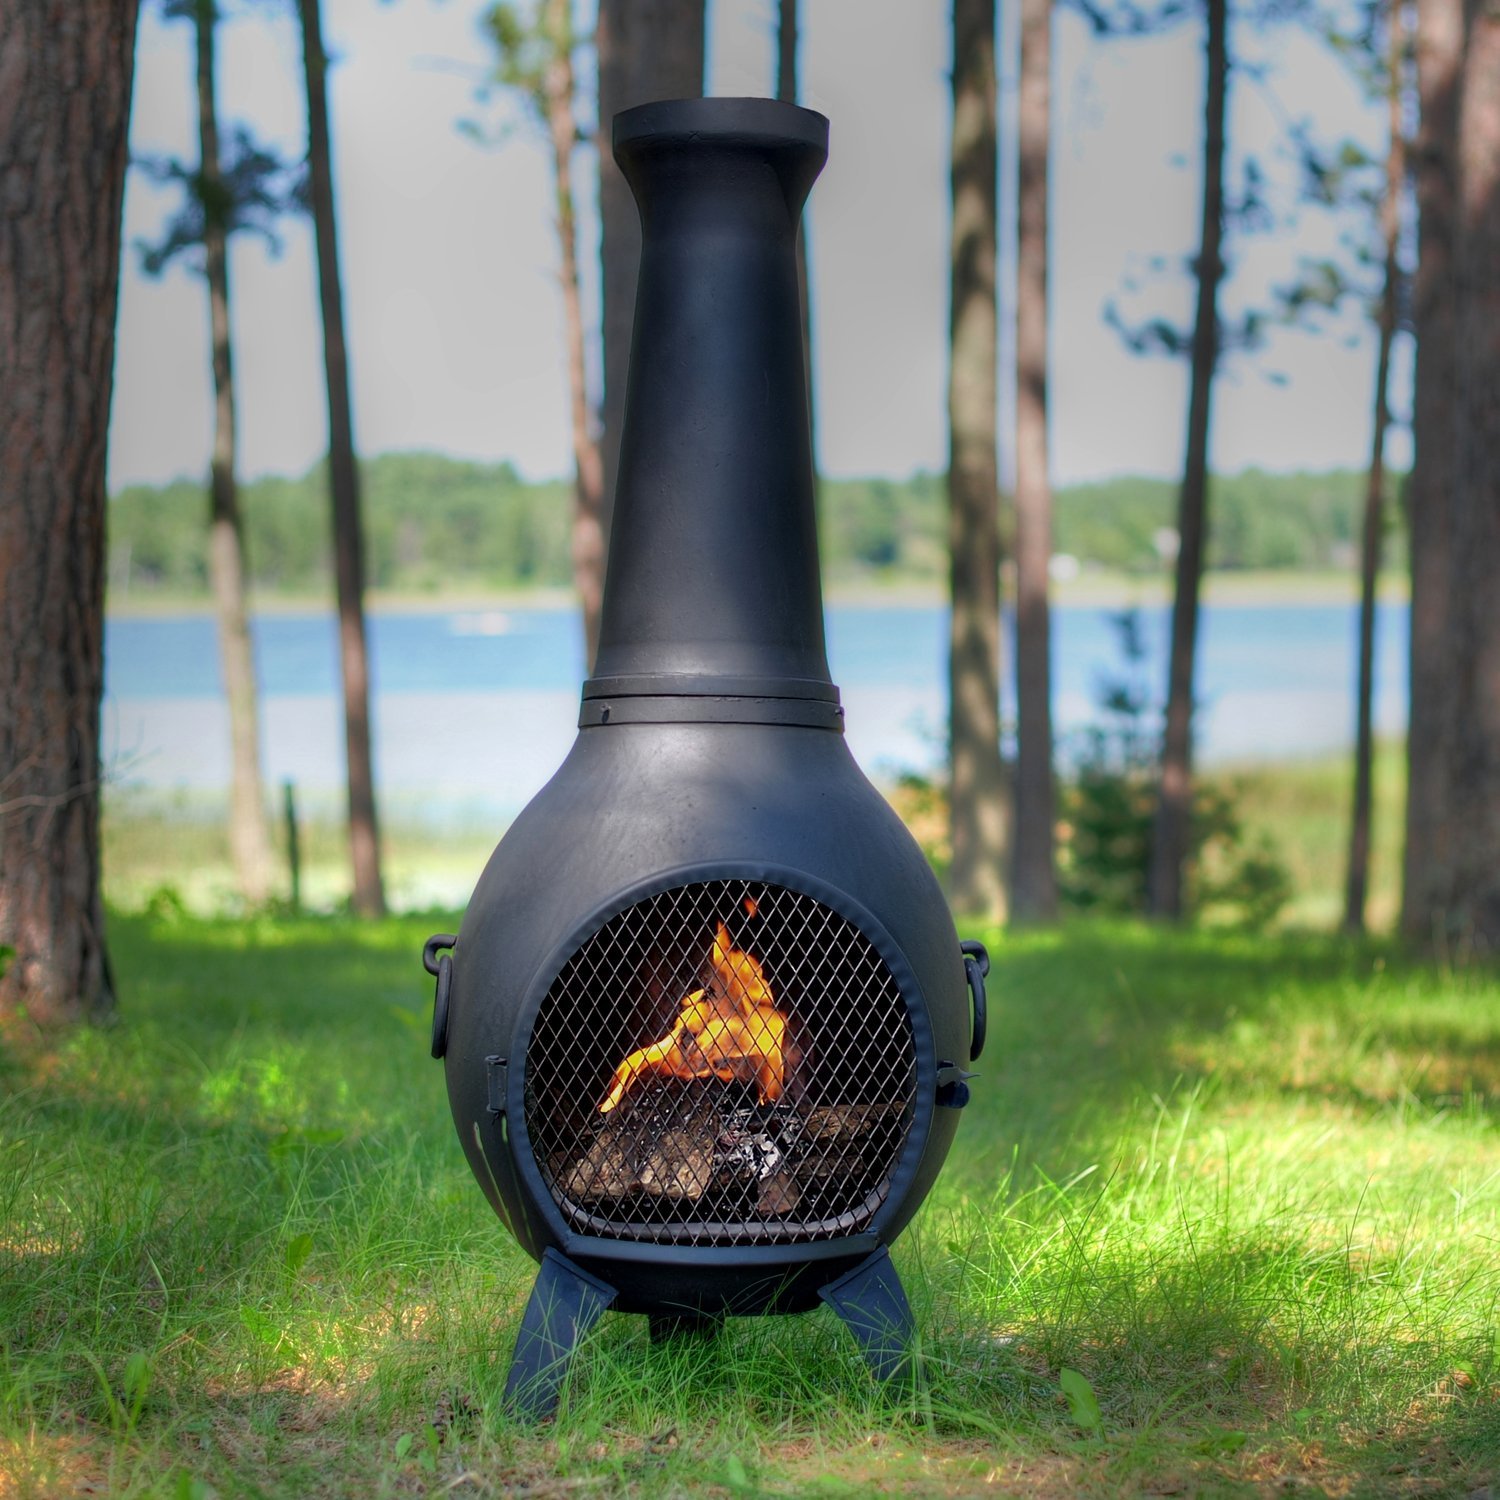 industrial style chiminea in a green garden on grass